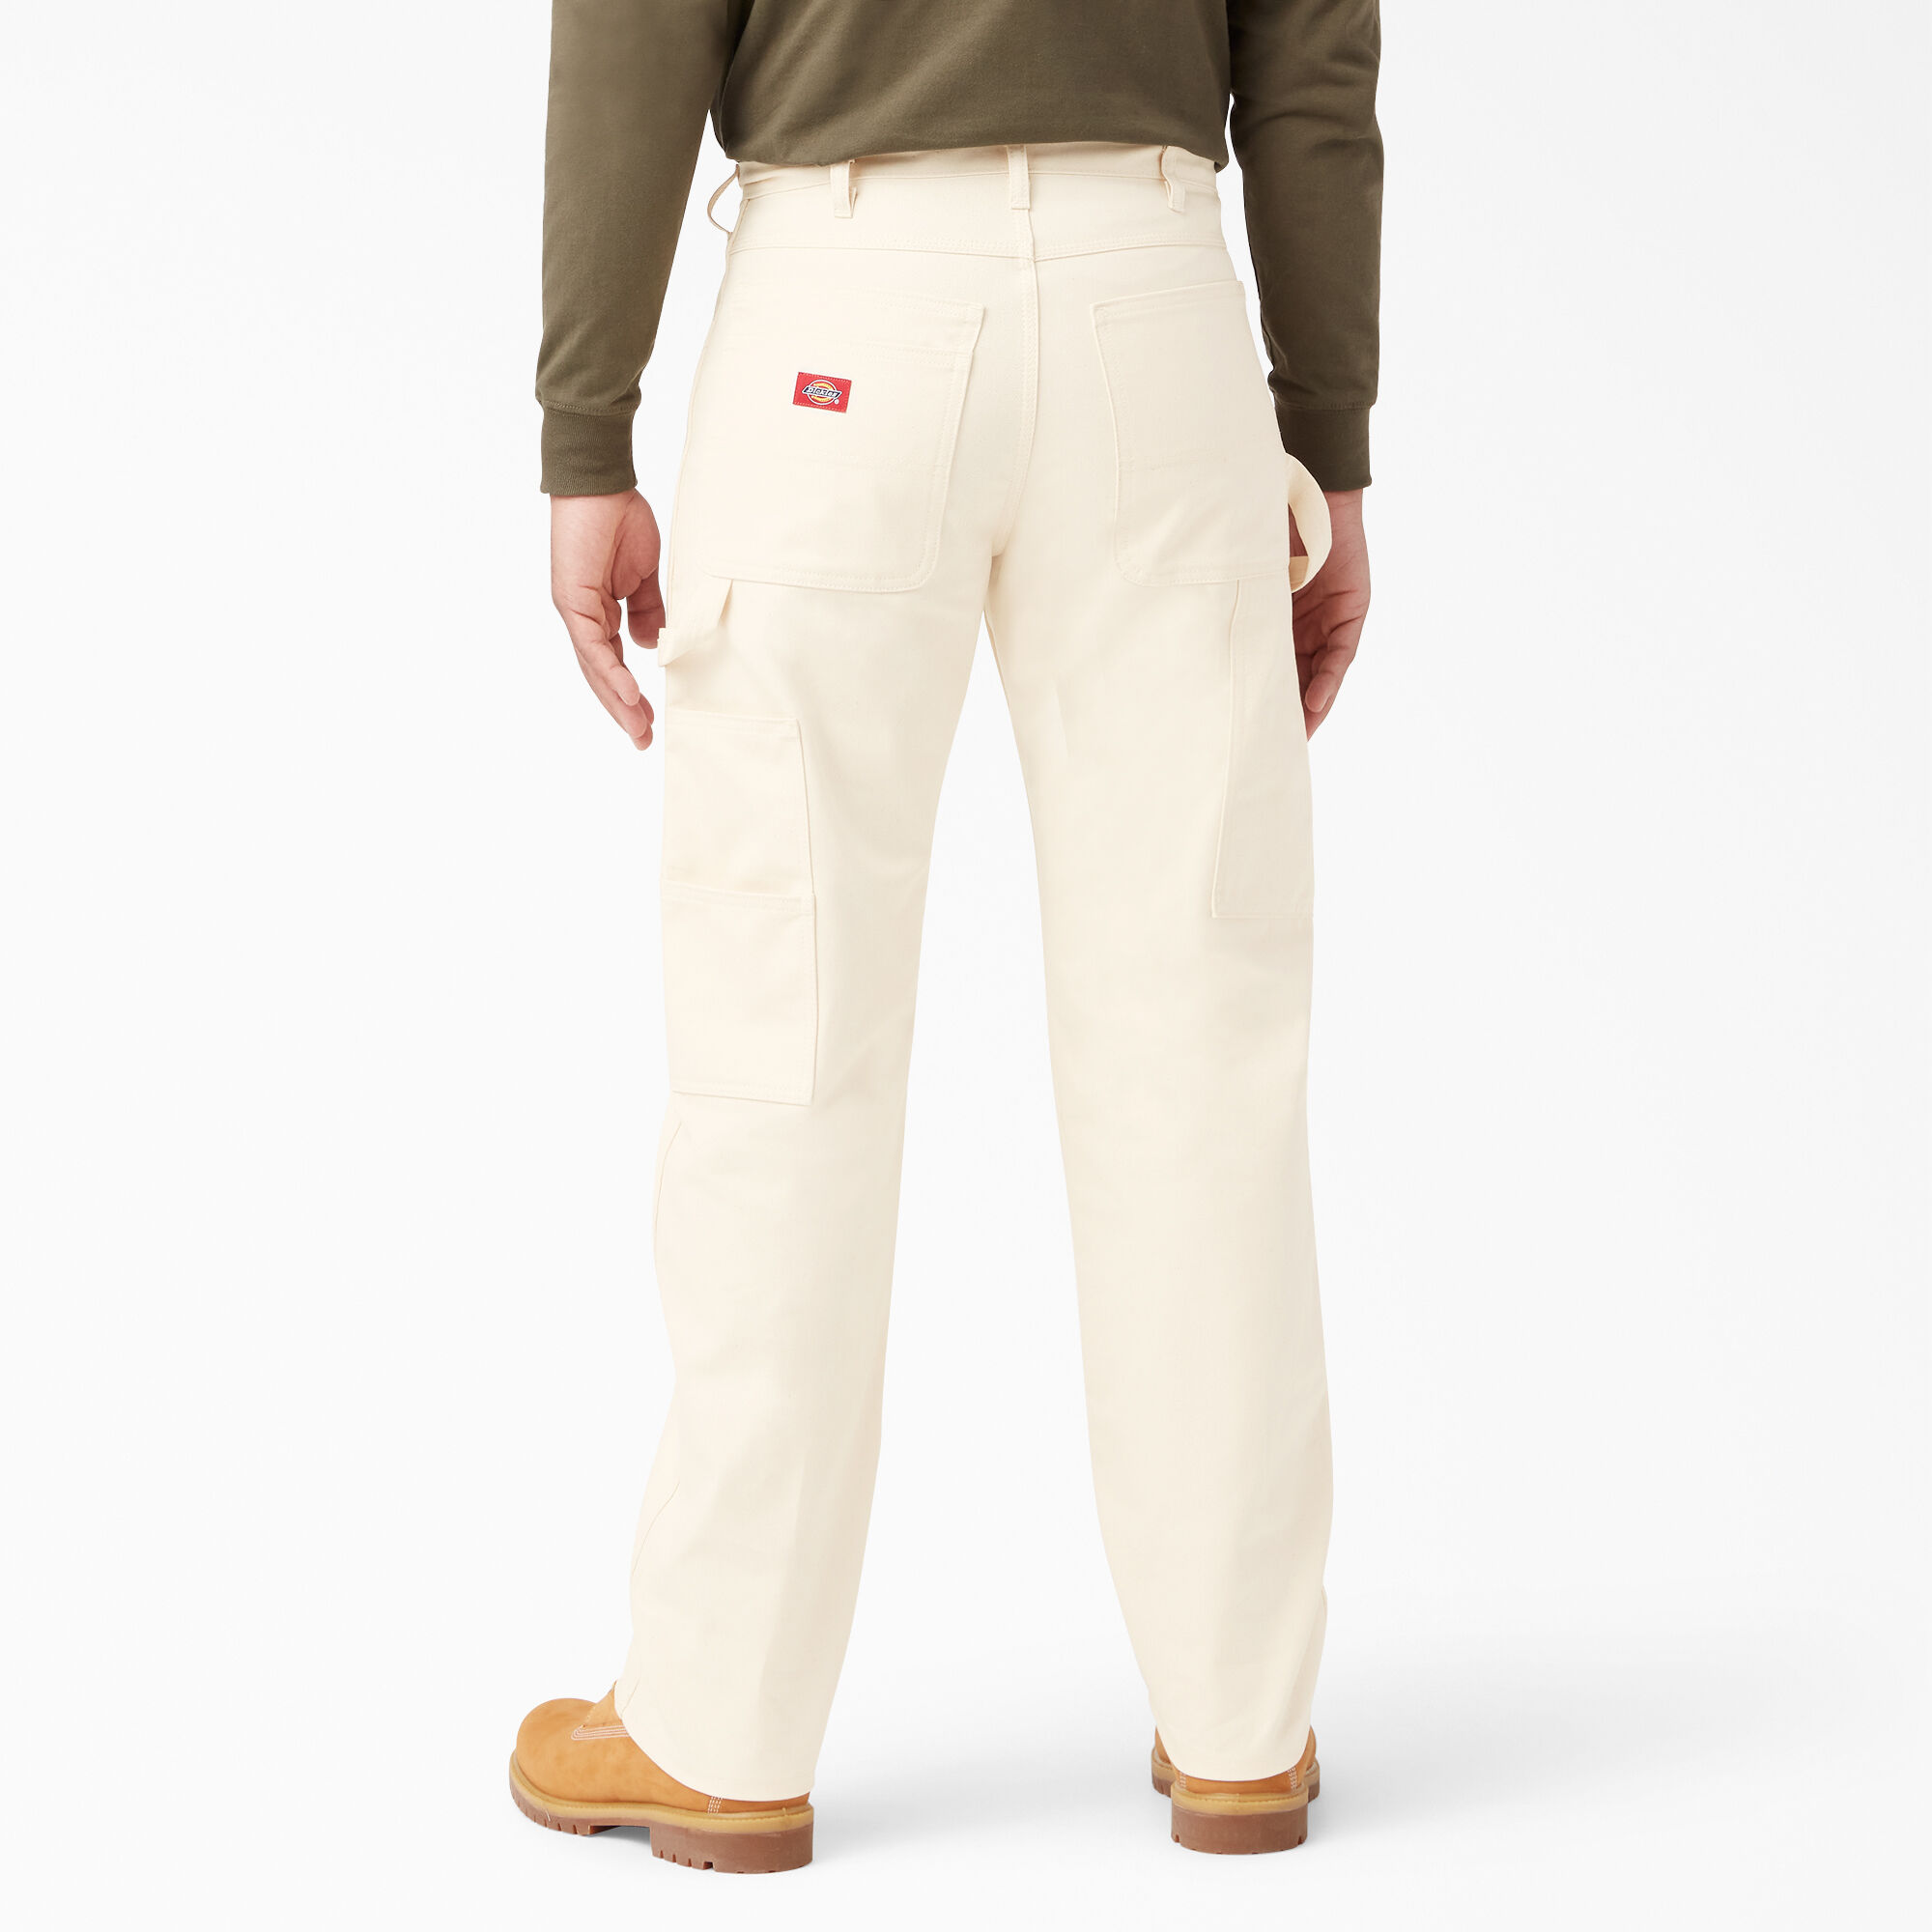 Relaxed Fit Straight Leg Painter's Pants